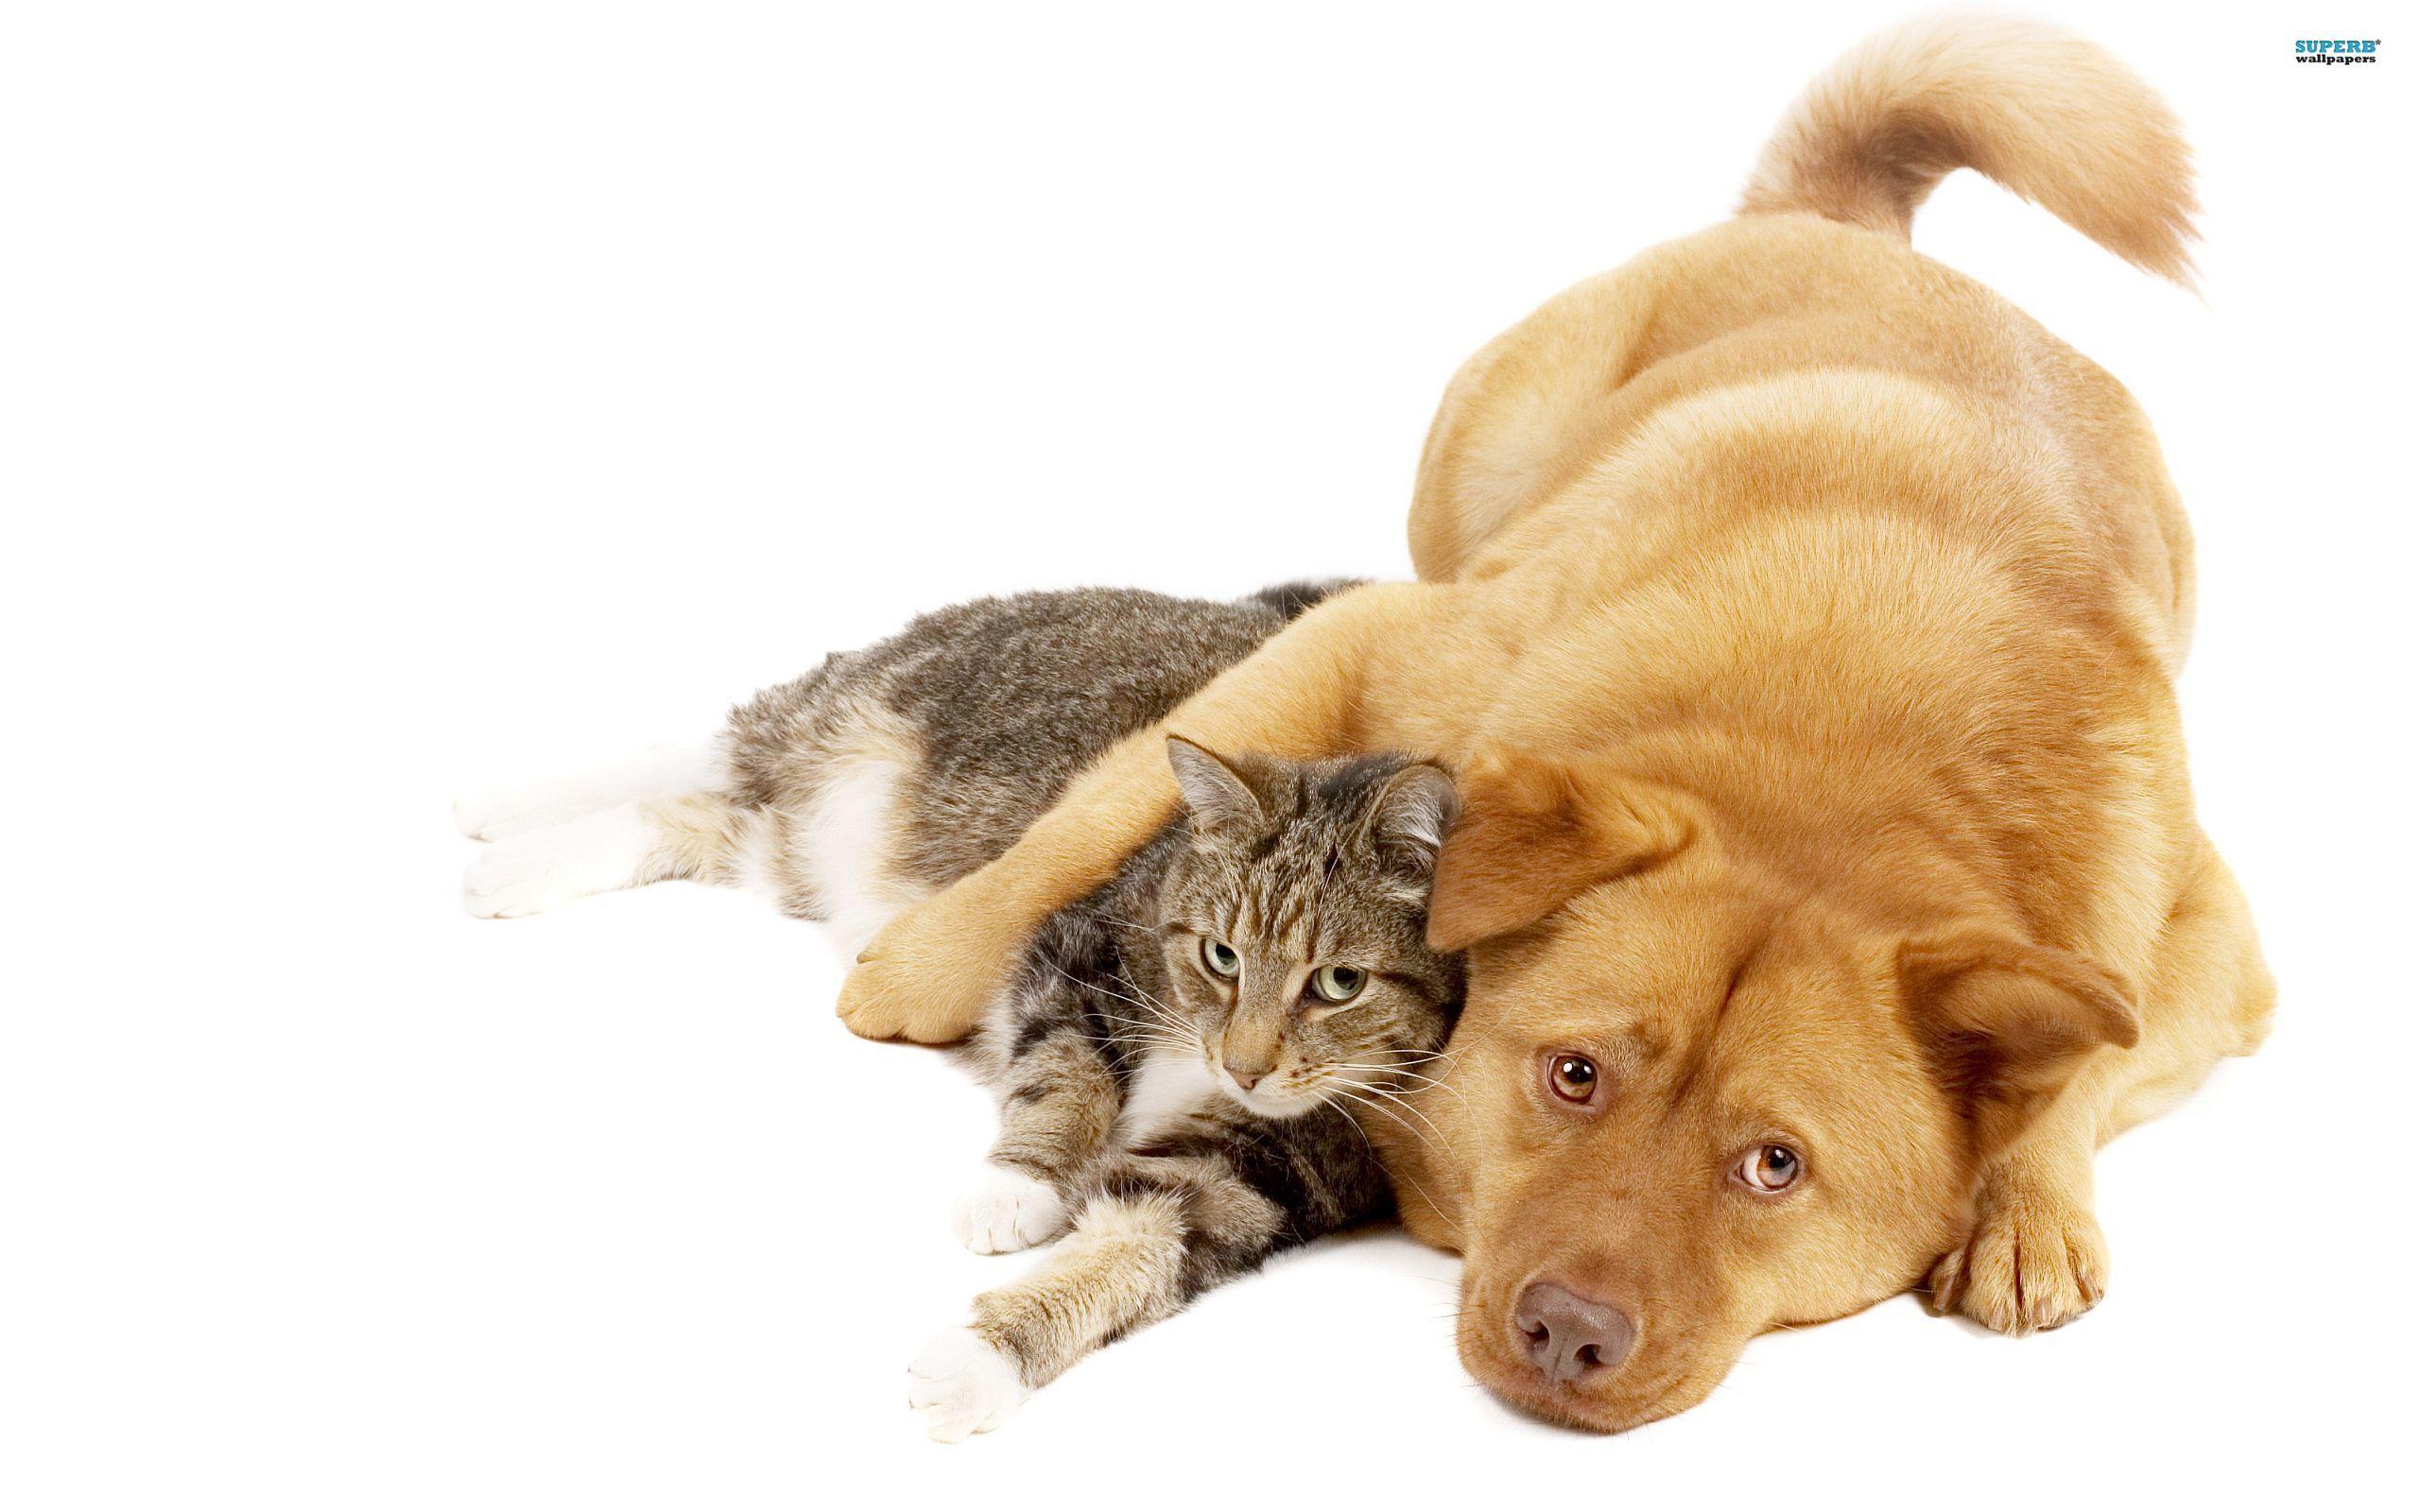 Cat and dog wallpapers